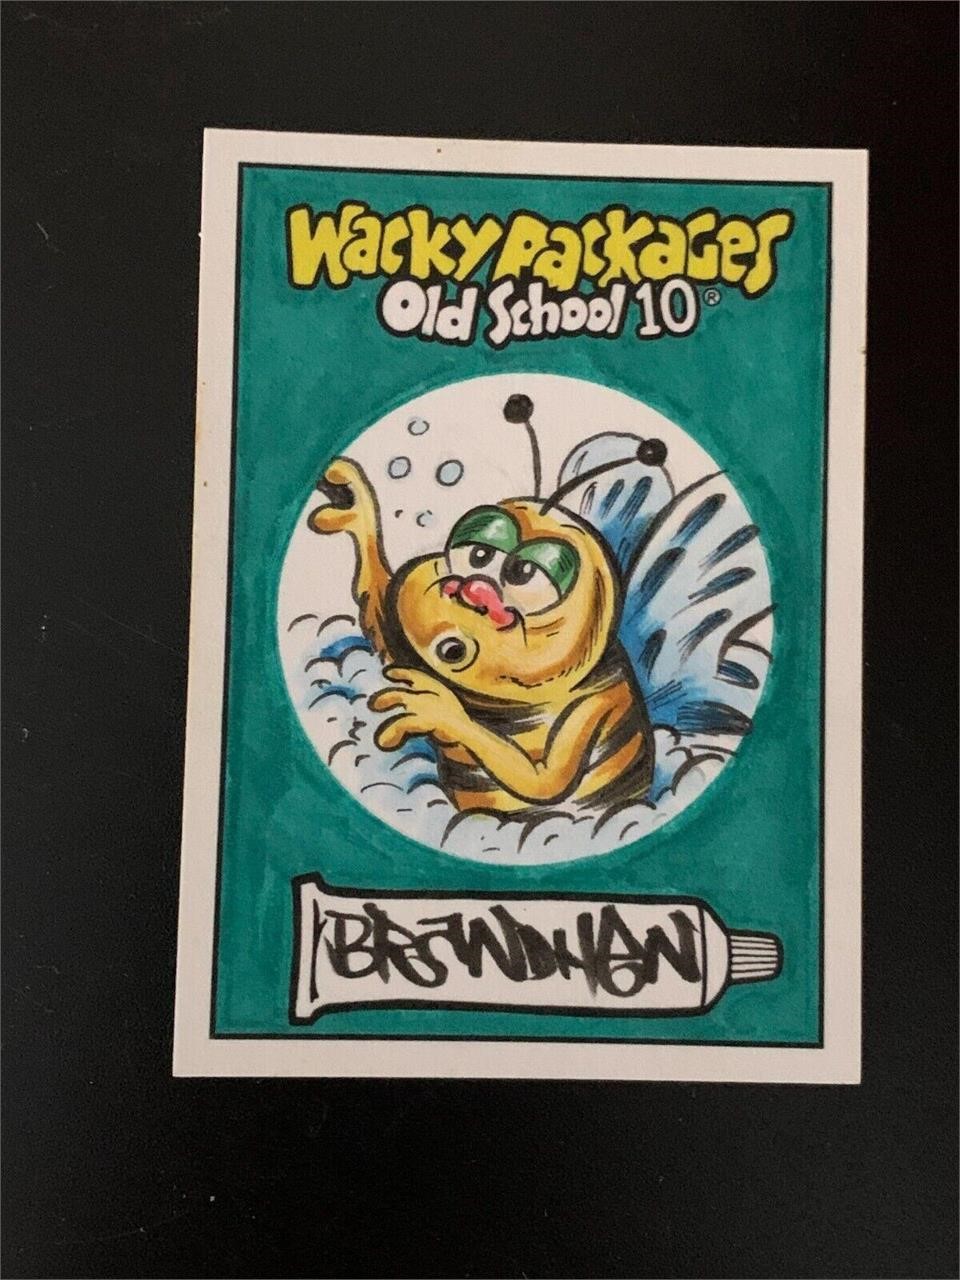 2021 Topps Wacky Packages OLDS10 Old School 10 Buz